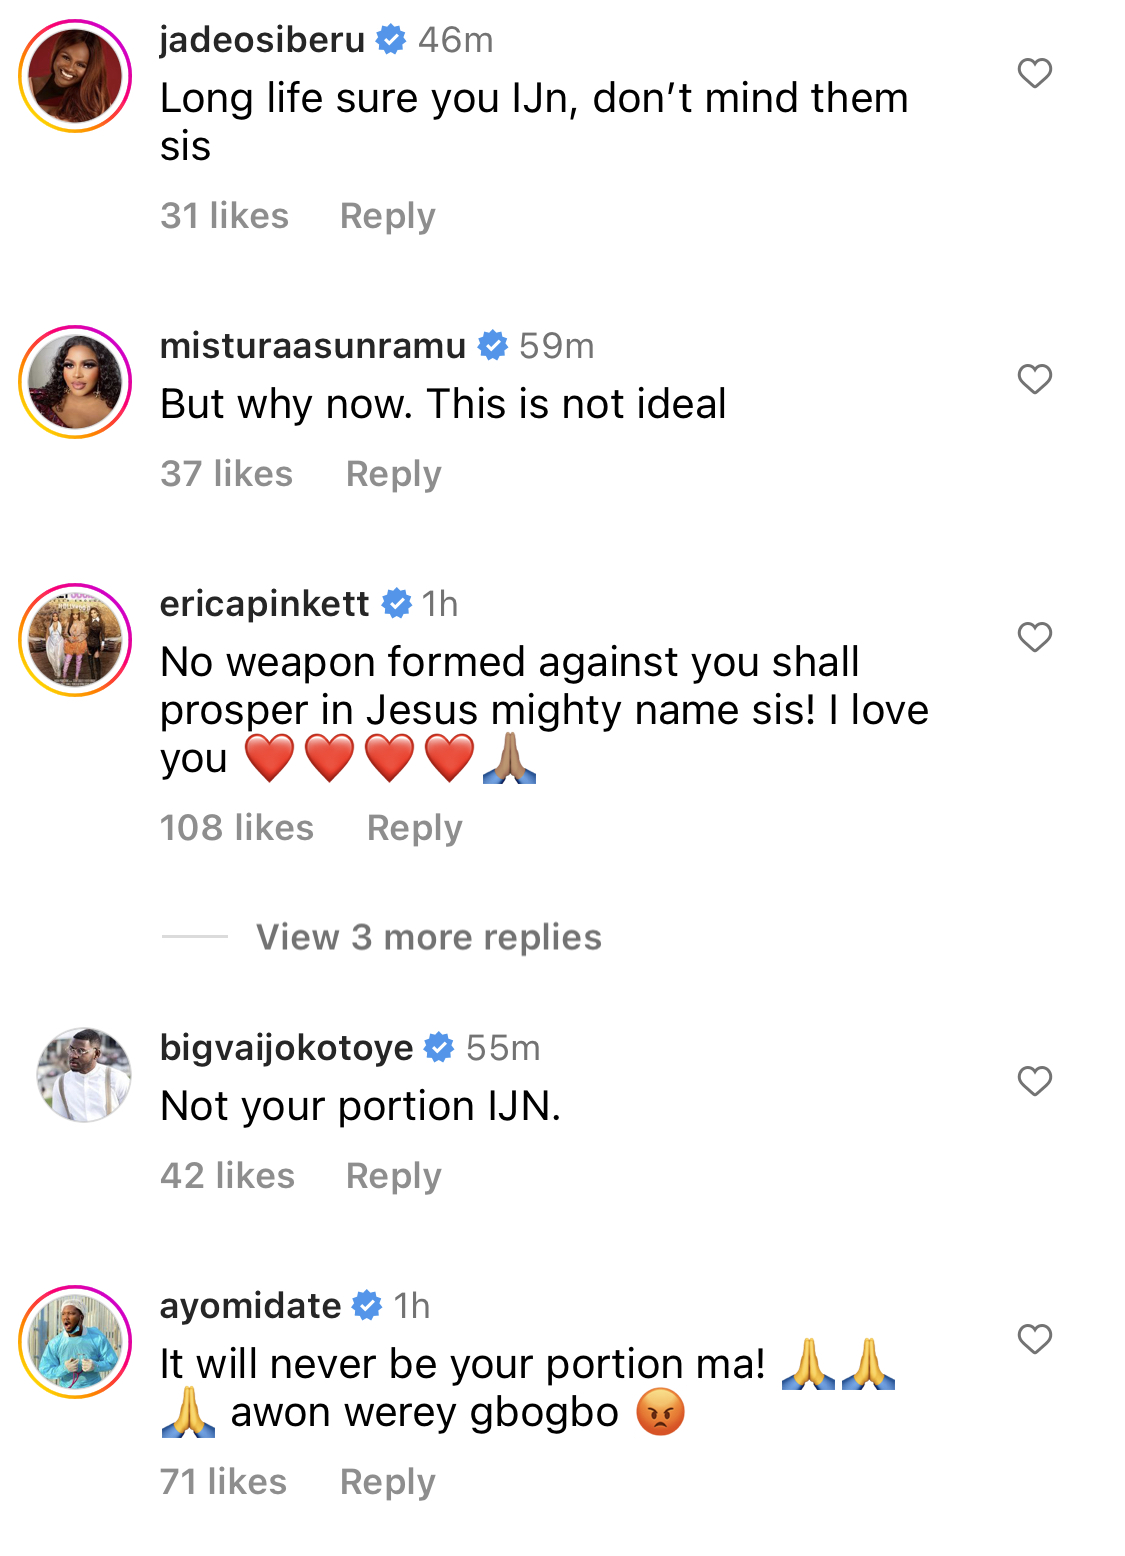 I am Asiwaju’s baby, death is not my portion - Actress Toyin Abraham reacts to threats over support for Tinubu